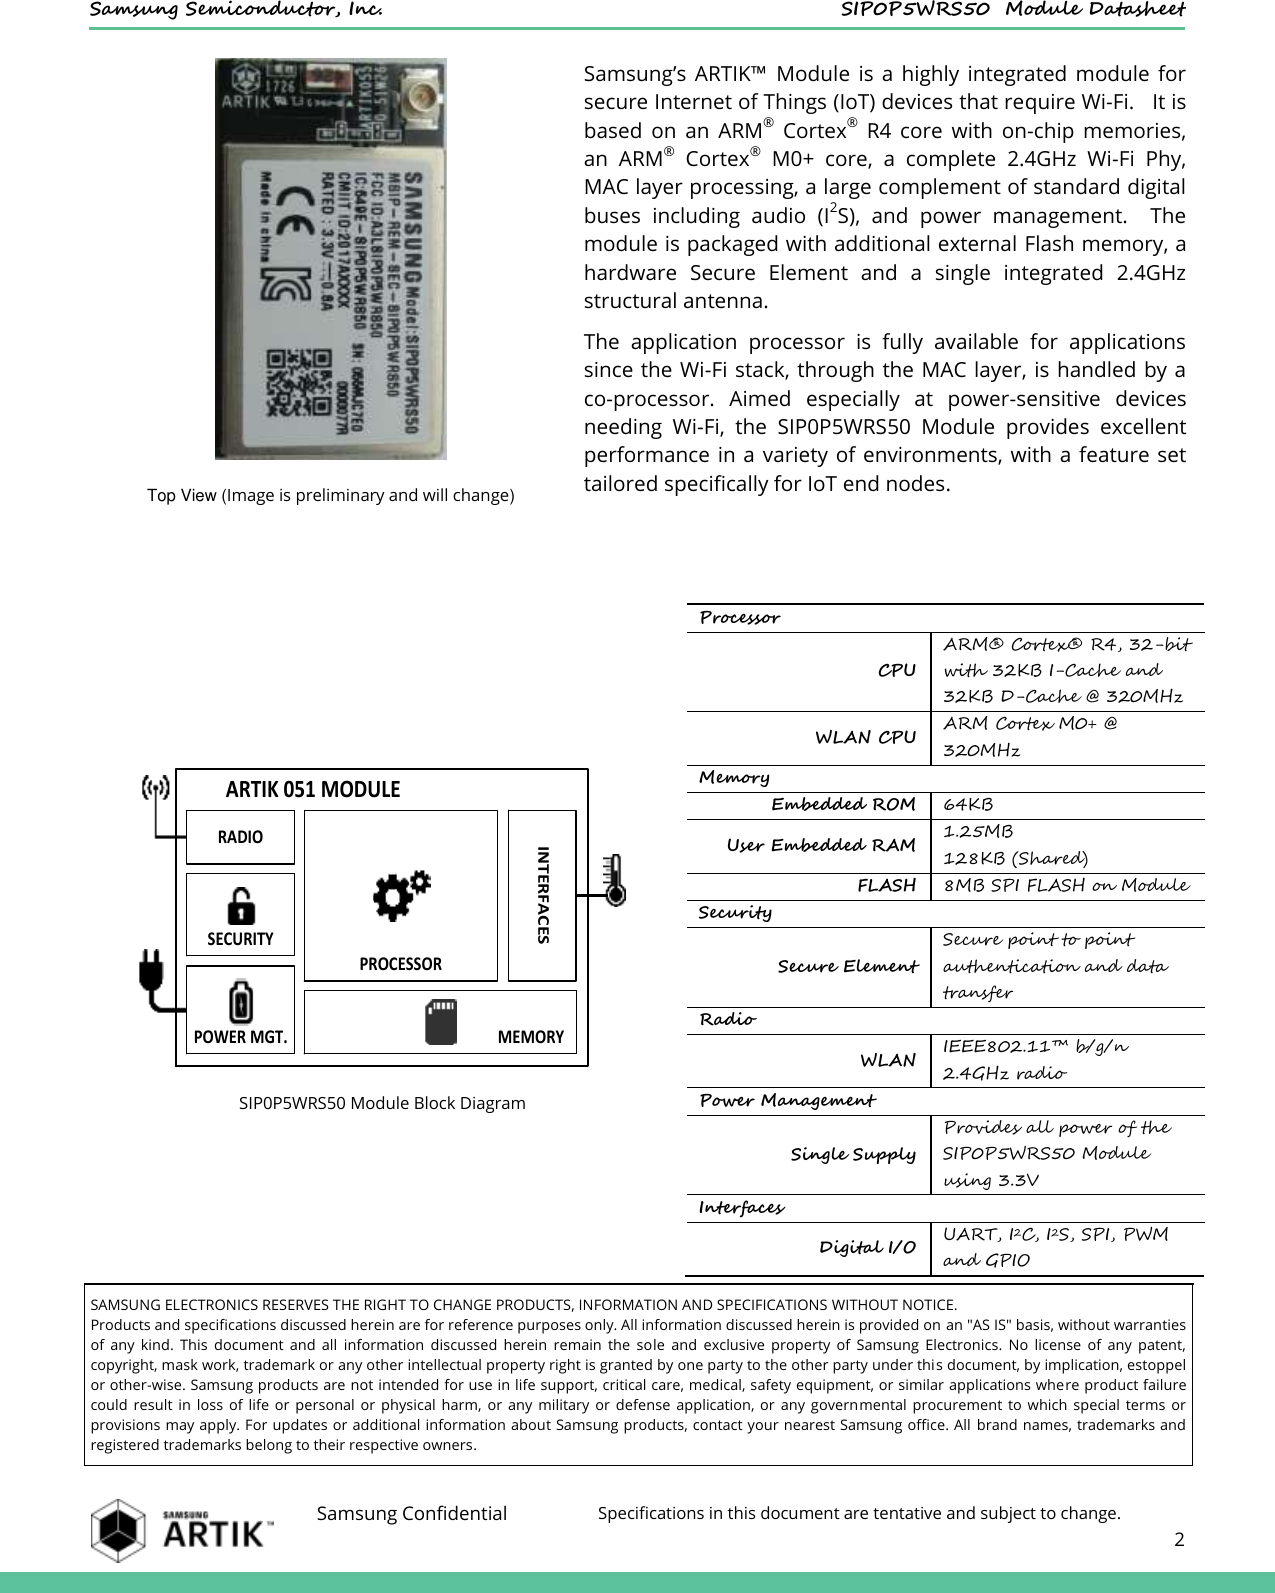    Samsung Semiconductor, Inc.  SIP0P5WRS50  Module Datasheet    Samsung Confidential Specifications in this document are tentative and subject to change.  2   Samsung’s  ARTIK™  Module  is  a highly  integrated  module  for secure Internet of Things (IoT) devices that require Wi-Fi.   It is based  on  an  ARM®  Cortex®  R4  core  with  on-chip  memories, an  ARM®  Cortex®  M0+  core,  a  complete  2.4GHz  Wi-Fi  Phy, MAC layer processing, a large complement of standard digital buses  including  audio  (I2S),  and  power  management.    The module is packaged with additional external Flash memory, a hardware  Secure  Element  and  a  single  integrated  2.4GHz structural antenna. The  application  processor  is  fully  available  for  applications since the Wi-Fi stack, through the MAC layer, is handled by a co-processor.  Aimed  especially  at  power-sensitive  devices needing  Wi-Fi,  the  SIP0P5WRS50  Module  provides  excellent performance in a variety of environments, with a  feature set tailored specifically for IoT end nodes. Top View (Image is preliminary and will change)     SIP0P5WRS50 Module Block Diagram Processor CPU ARM®  Cortex®  R4, 32-bit with 32KB I-Cache and 32KB D-Cache @ 320MHz WLAN CPU ARM Cortex M0+ @ 320MHz Memory Embedded ROM 64KB User Embedded RAM 1.25MB 128KB (Shared) FLASH 8MB SPI FLASH on Module Security Secure Element Secure point to point authentication and data transfer Radio WLAN IEEE802.11™ b/g/n 2.4GHz radio Power Management Single Supply Provides all power of the SIP0P5WRS50 Module using 3.3V Interfaces Digital I/O UART, I2C, I2S, SPI, PWM and GPIO  SAMSUNG ELECTRONICS RESERVES THE RIGHT TO CHANGE PRODUCTS, INFORMATION AND SPECIFICATIONS WITHOUT NOTICE. Products and specifications discussed herein are for reference purposes only. All information discussed herein is provided on an &quot;AS IS&quot; basis, without warranties of  any  kind.  This  document  and  all  information  discussed  herein  remain  the  sole  and  exclusive  property  of  Samsung  Electronics.  No  license  of  any  patent, copyright, mask work, trademark or any other intellectual property right is granted by one party to the other party under this document, by implication, estoppel or other-wise. Samsung products are not intended for use in life support, critical care, medical, safety equipment, or similar applications where product failure could  result  in  loss  of  life  or  personal  or  physical  harm,  or  any  military  or  defense  application,  or  any  governmental  procurement  to  which  special  terms  or provisions may apply. For updates or additional information about Samsung products, contact your nearest Samsung office. All  brand names, trademarks and registered trademarks belong to their respective owners. ARTIK 051 MODULERADIOSECURITYPROCESSORPOWER MGT. MEMORYINTERFACES